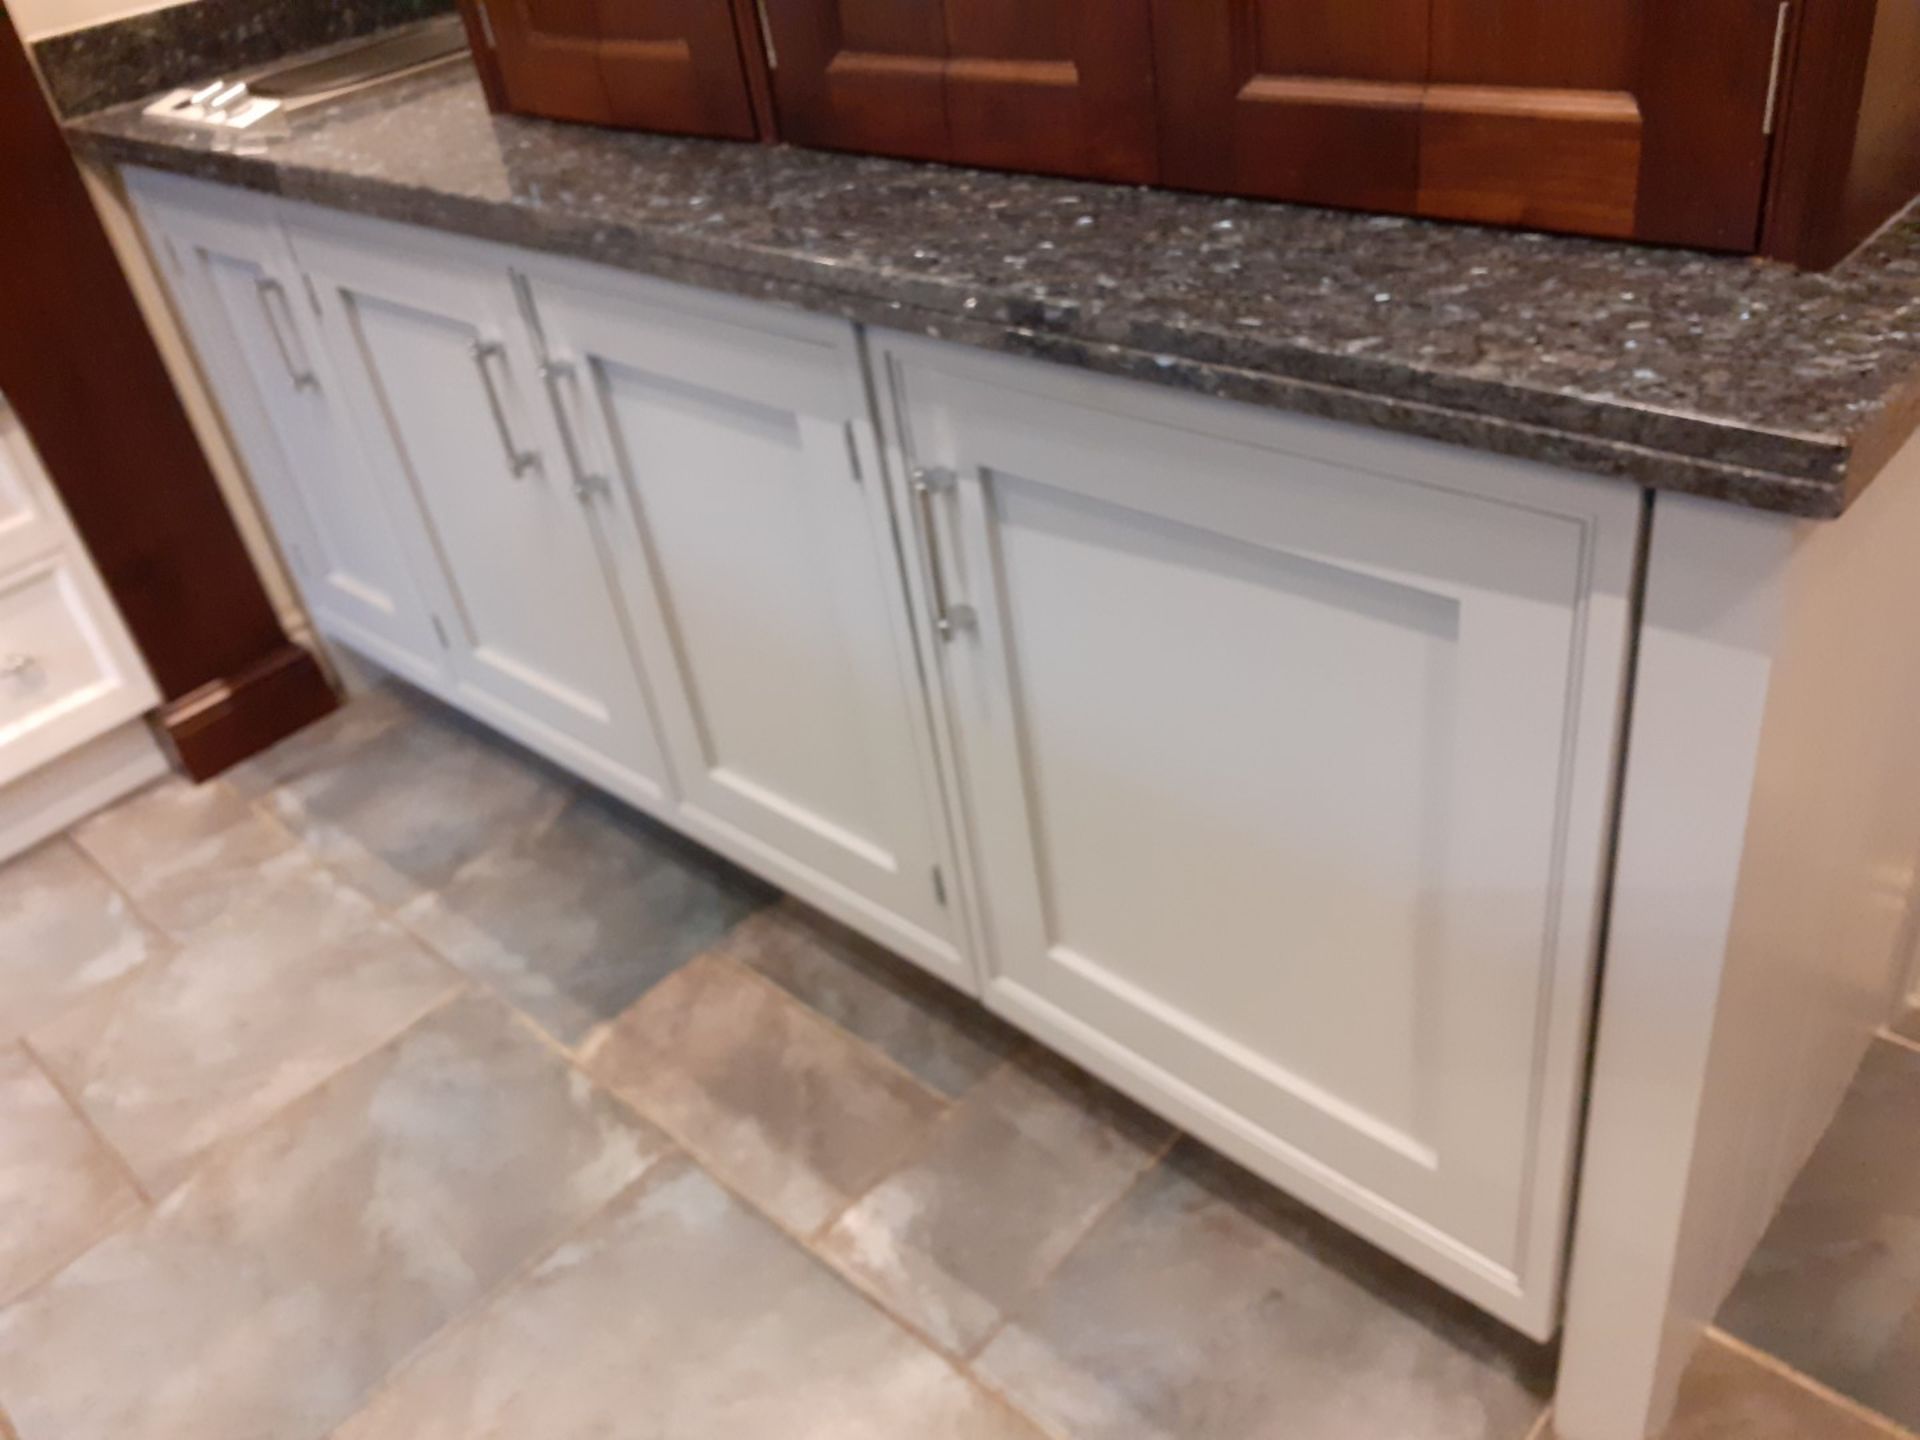 1 x Bespoke Solid Wood Painted Kitchen Beautifully Appointed With Granite Worktops, Central Island - Image 7 of 75